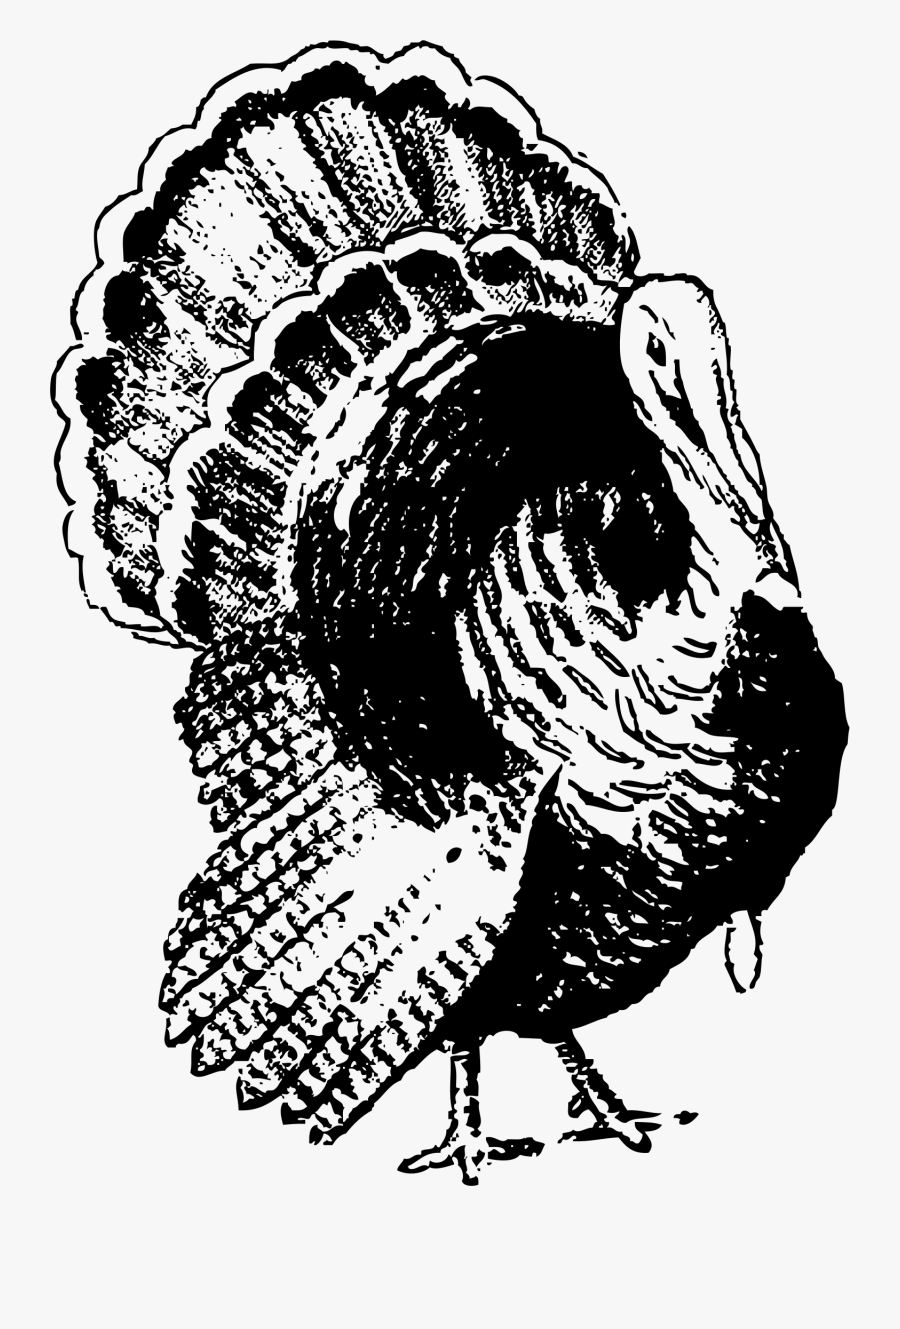 Free Turkey - Free Clipart Images Black And White Turkey, Transparent Clipart